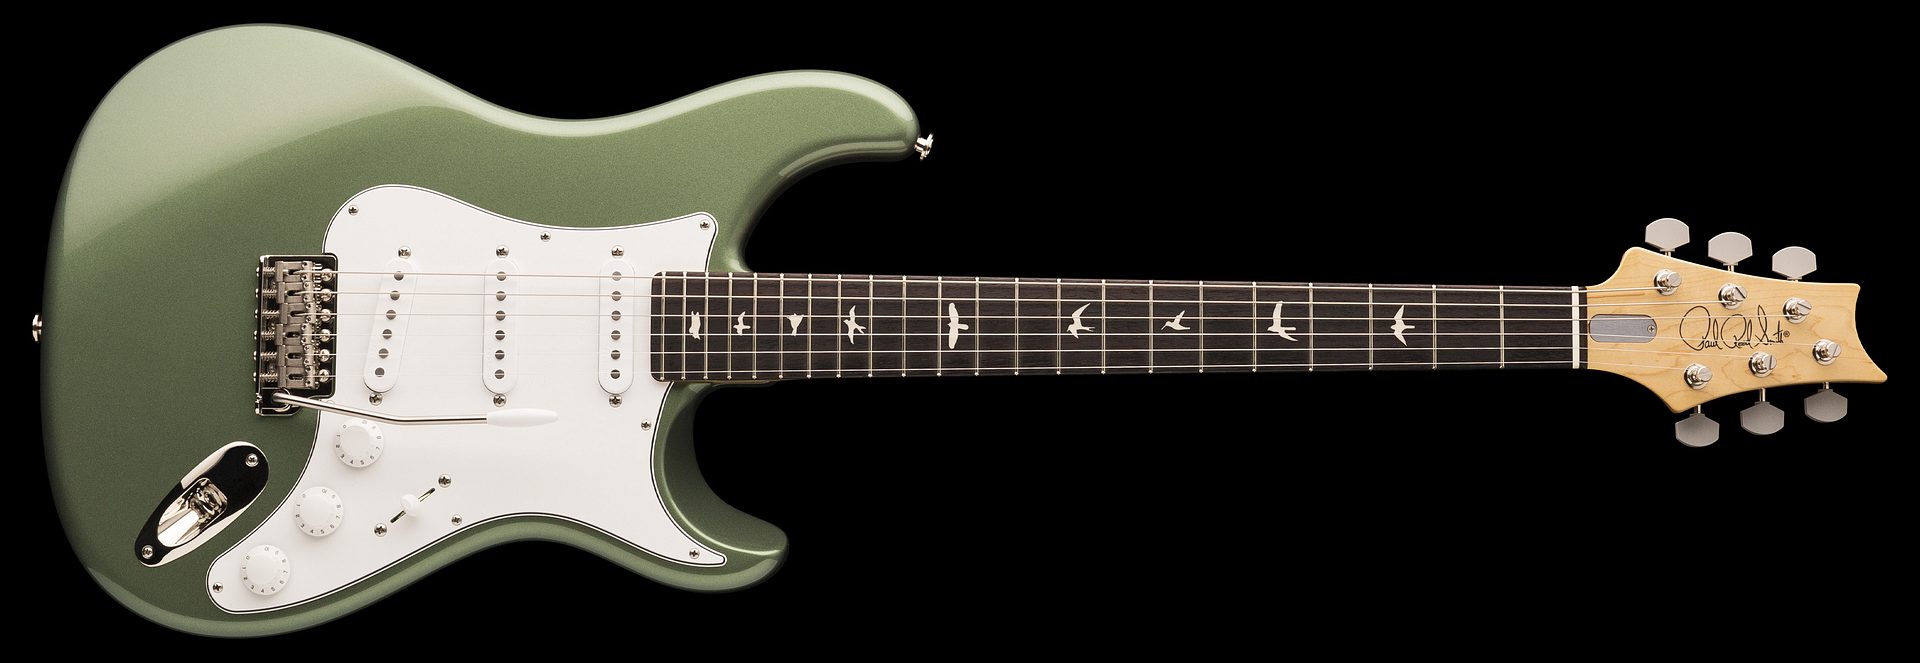 Orion Green (Rosewood)